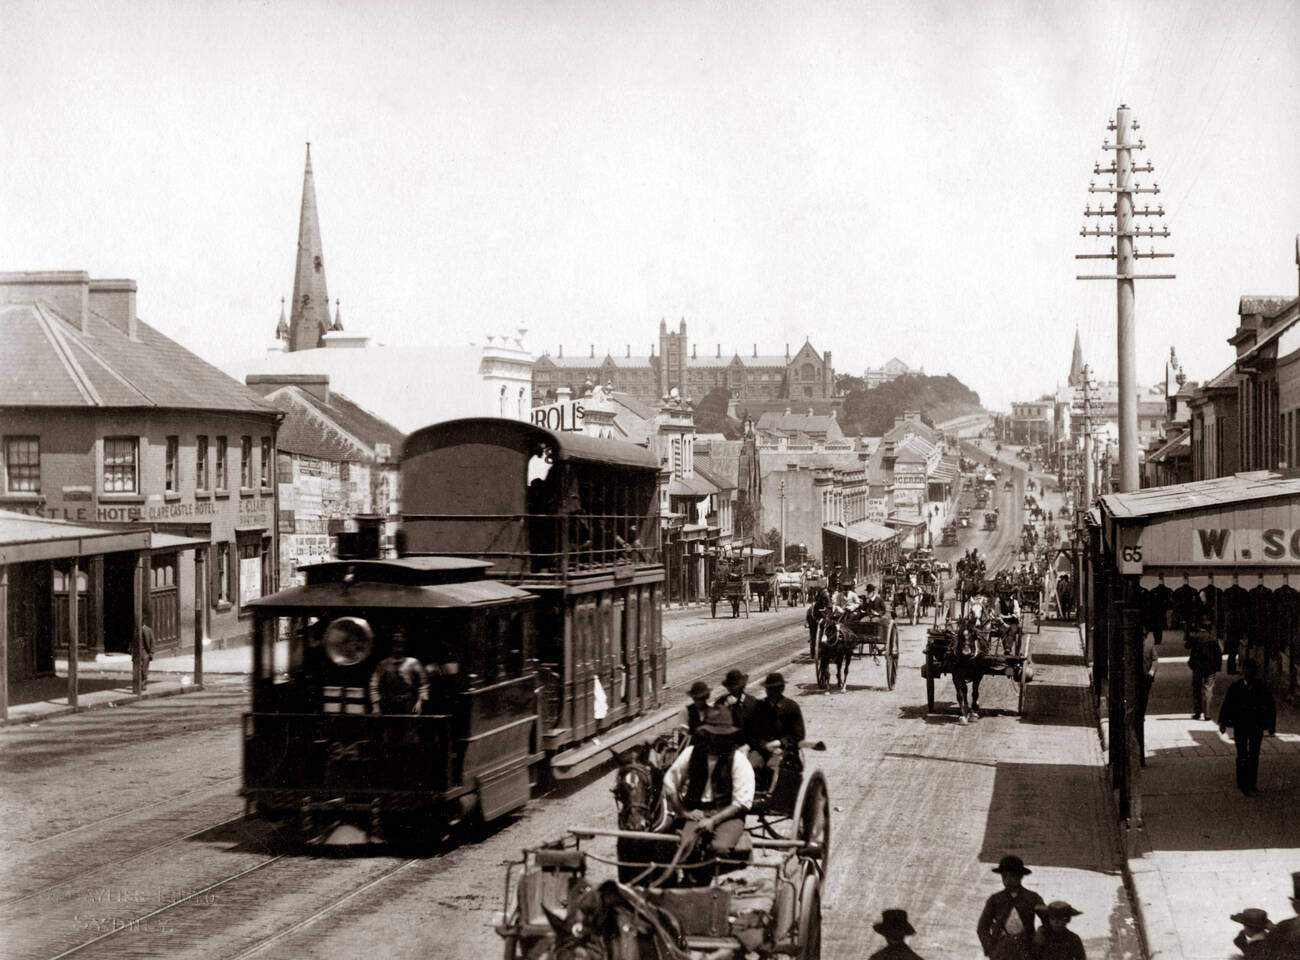 Sydney street with steam powered tram and horse carriages, 1890s